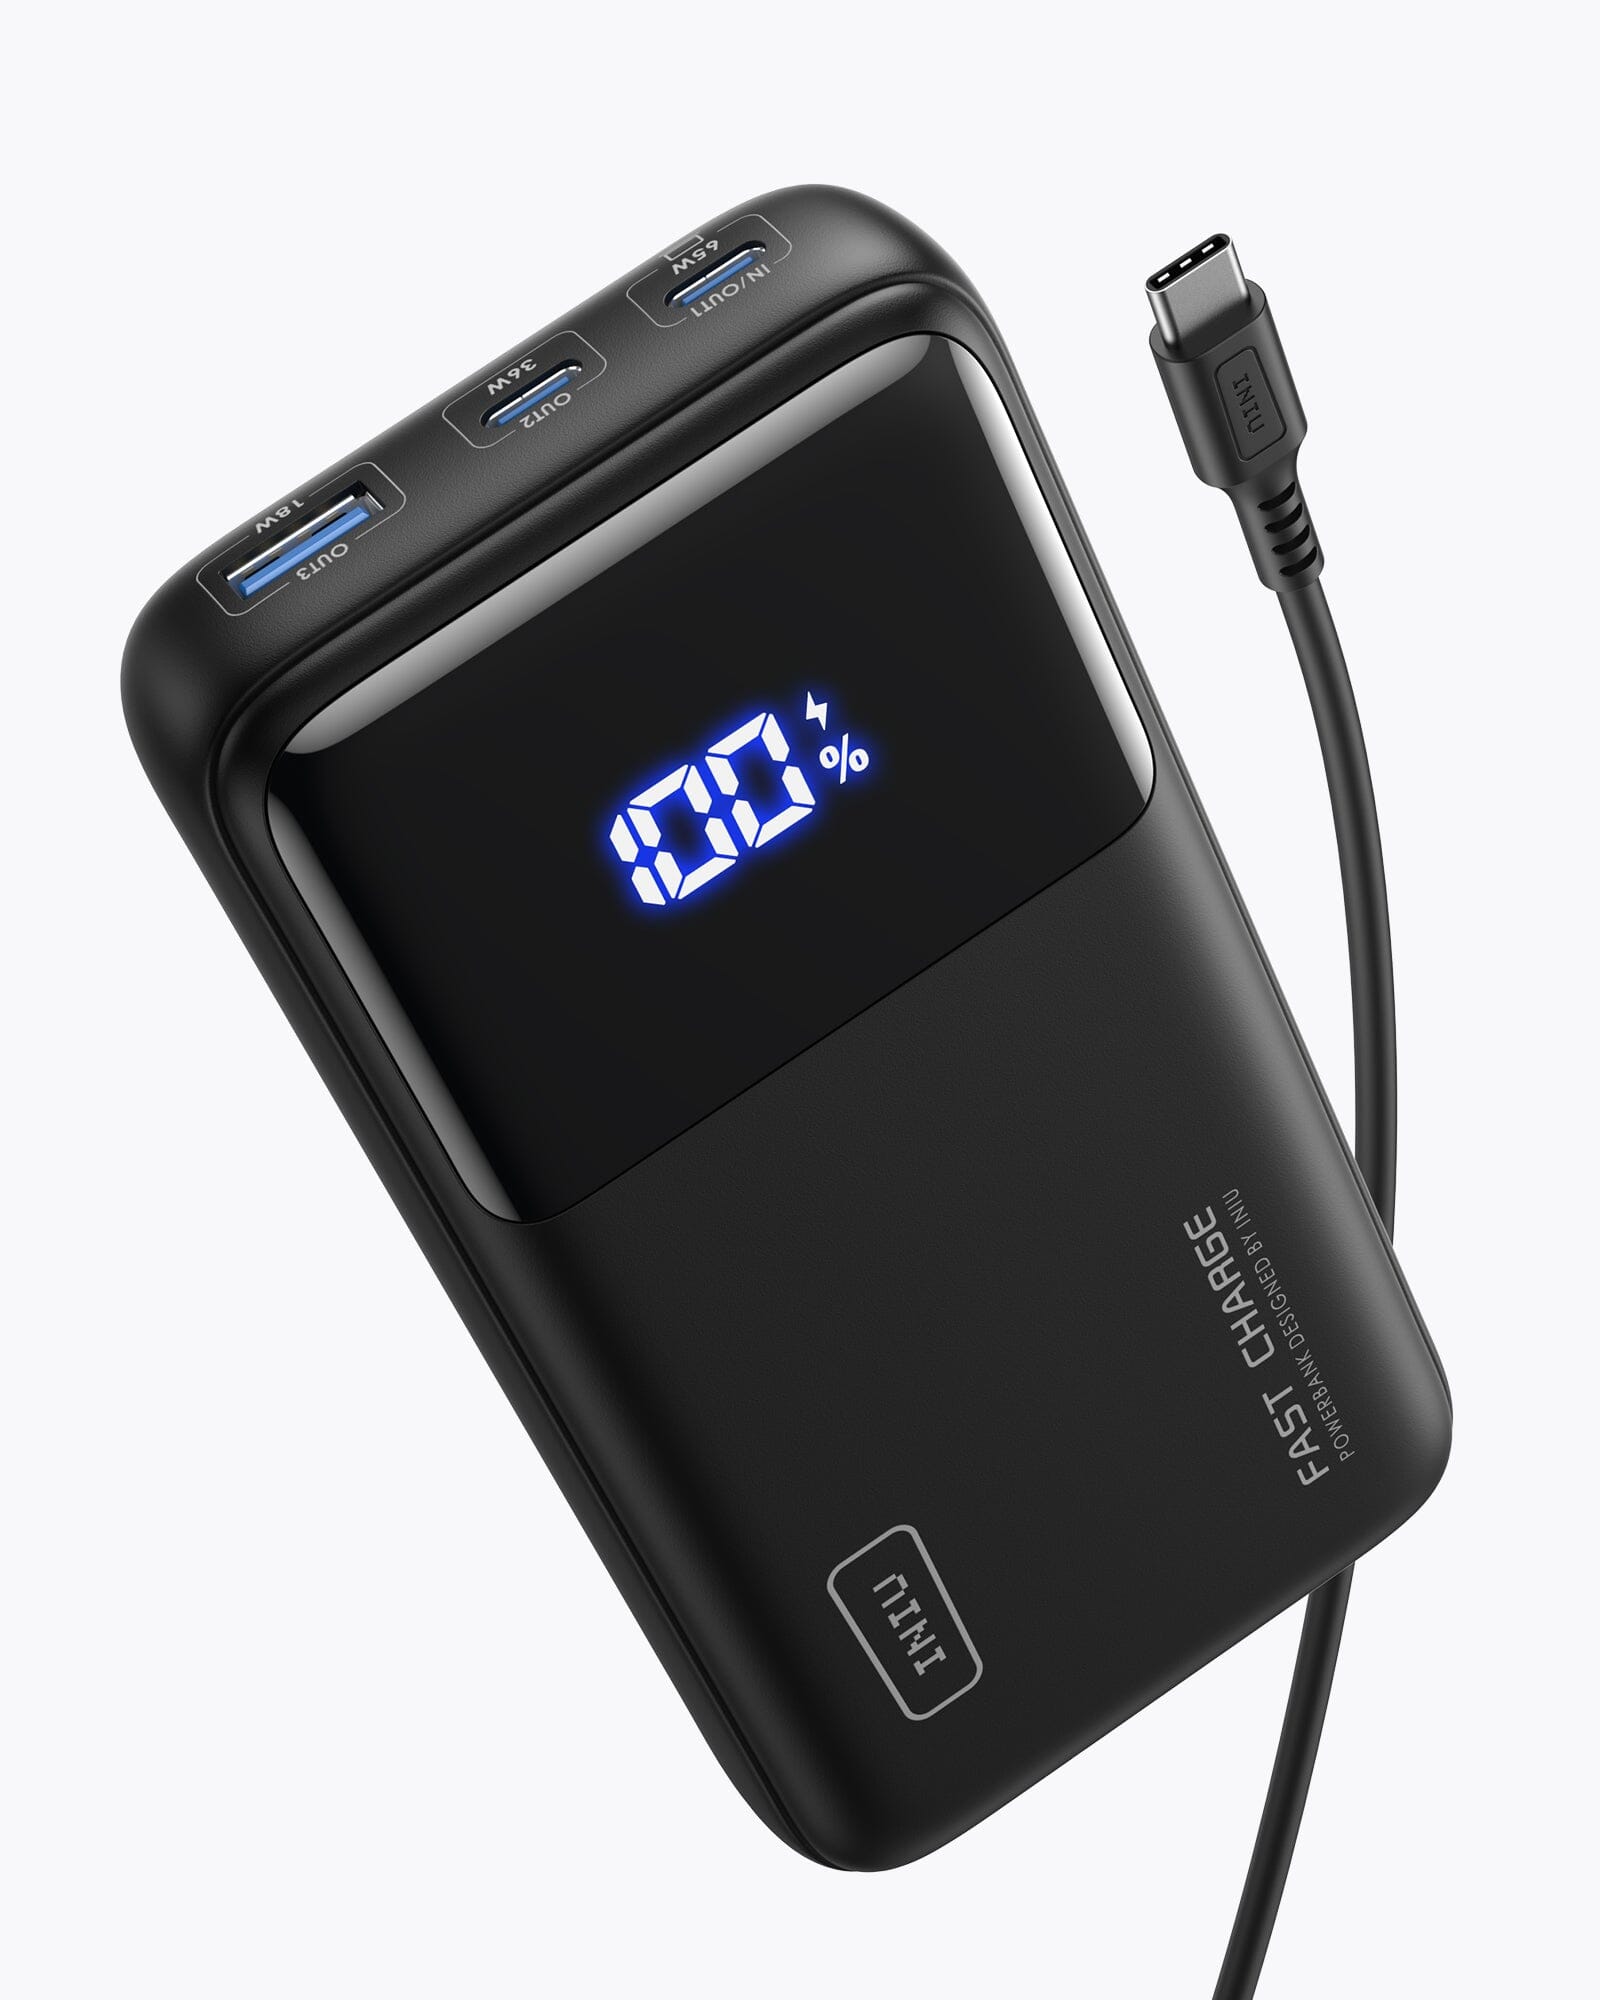 INIU B64 140W power bank: Unrivaled power for on-the-go enthusiasts